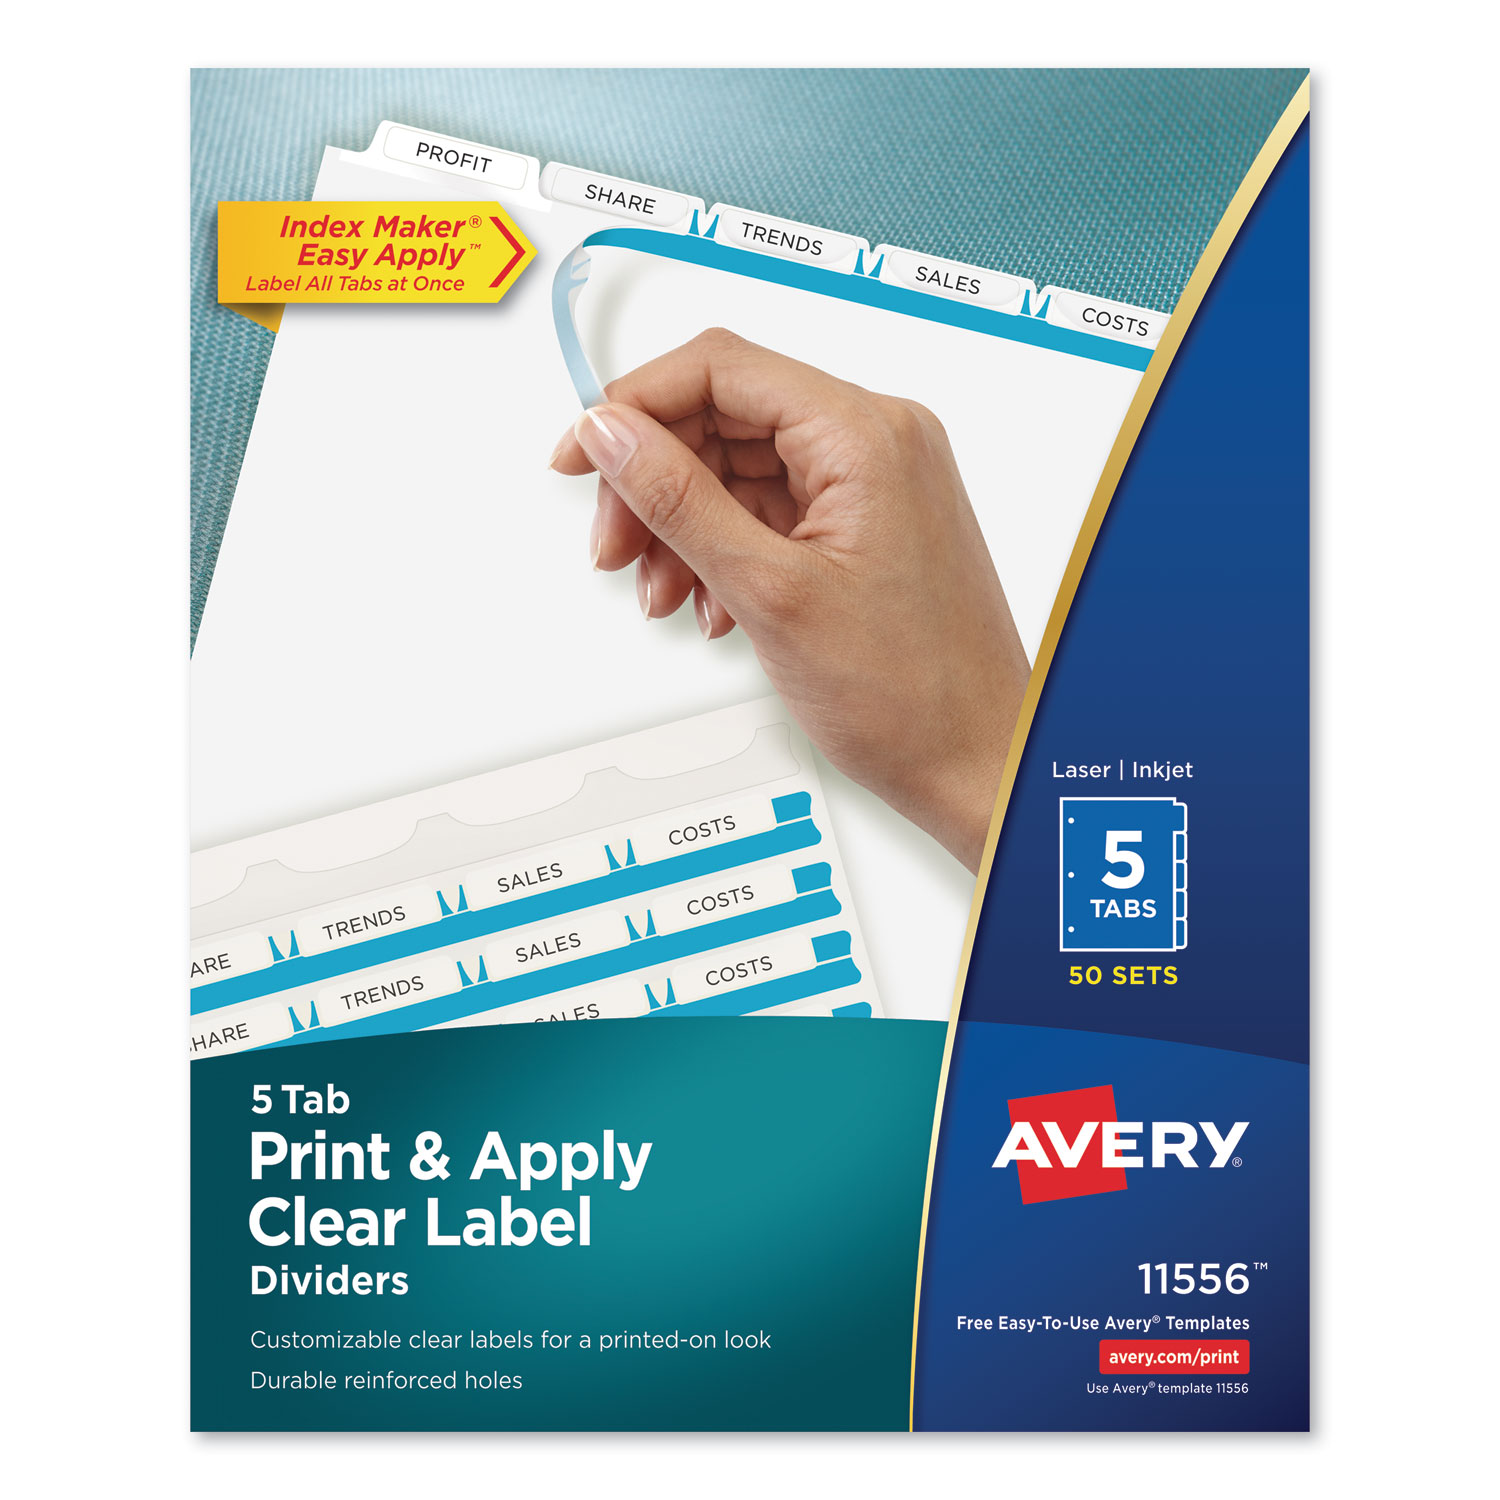 Avery Print And Apply Index Maker Clear Label Dividers, 5 White Tabs, Letter, 50 Sets